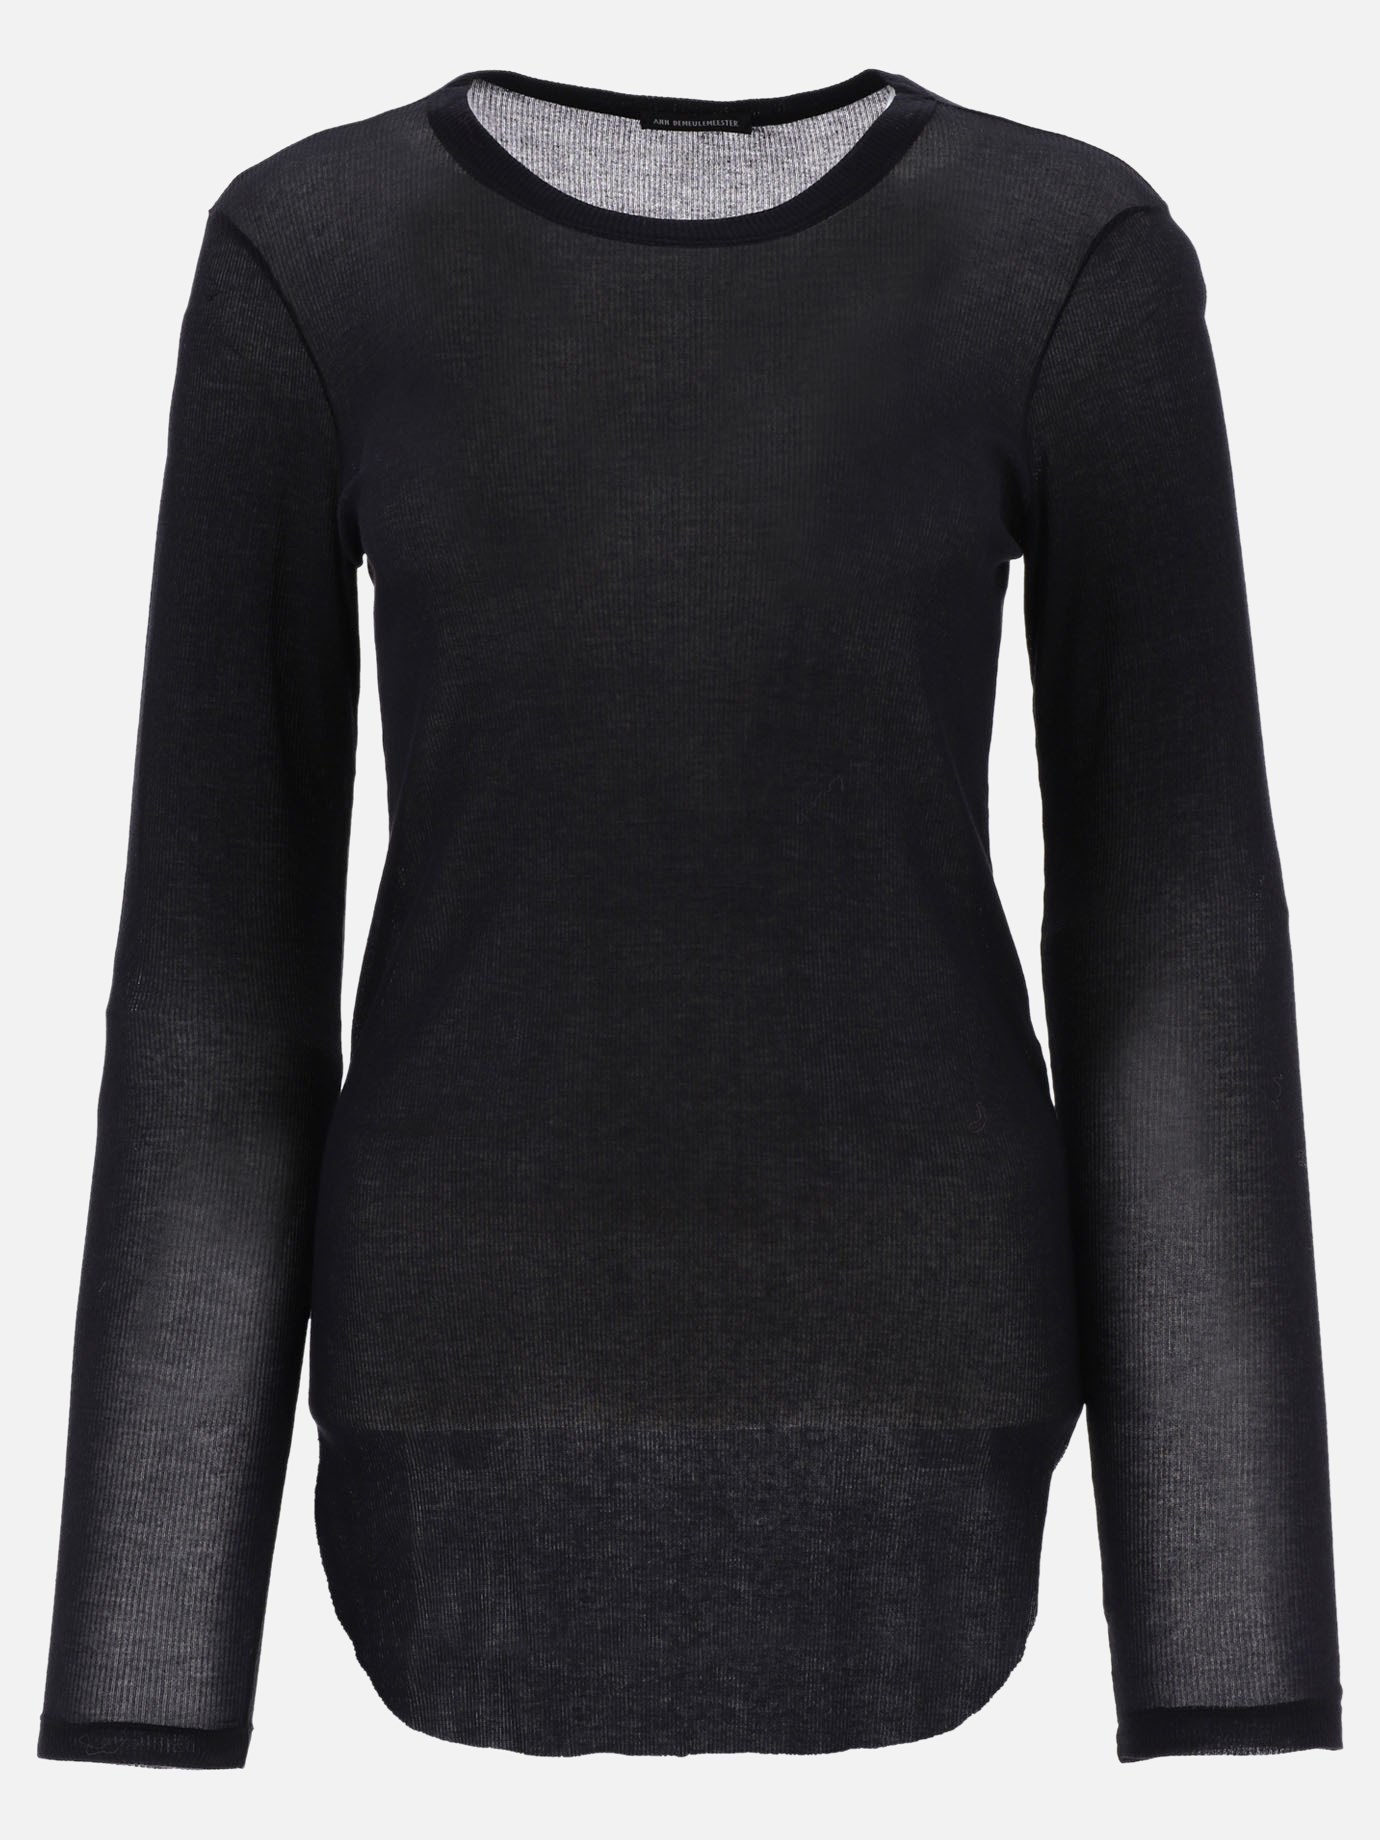  Karo  ribbed t-shirt by Ann Demeulemeester